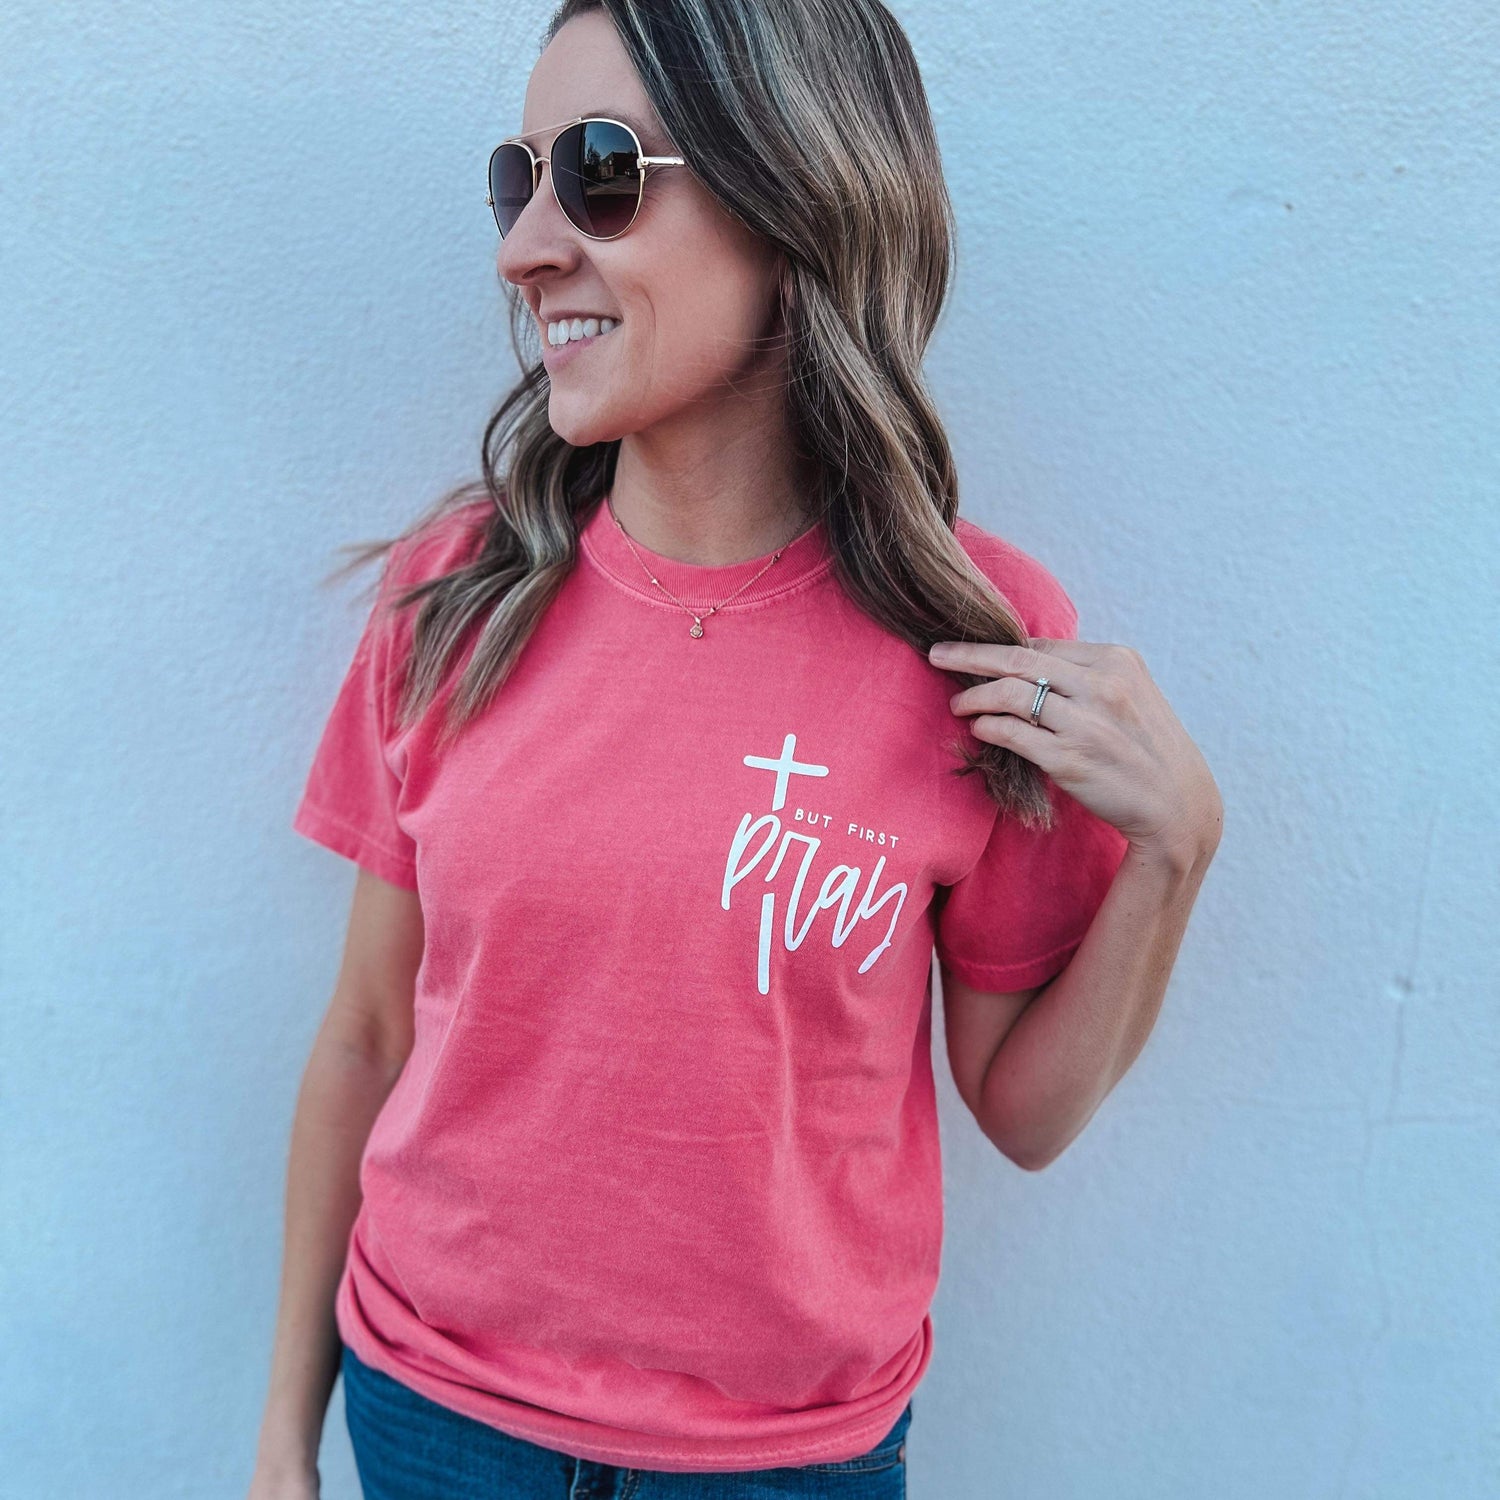 BUT FIRST PRAY - Comfort Color Tee